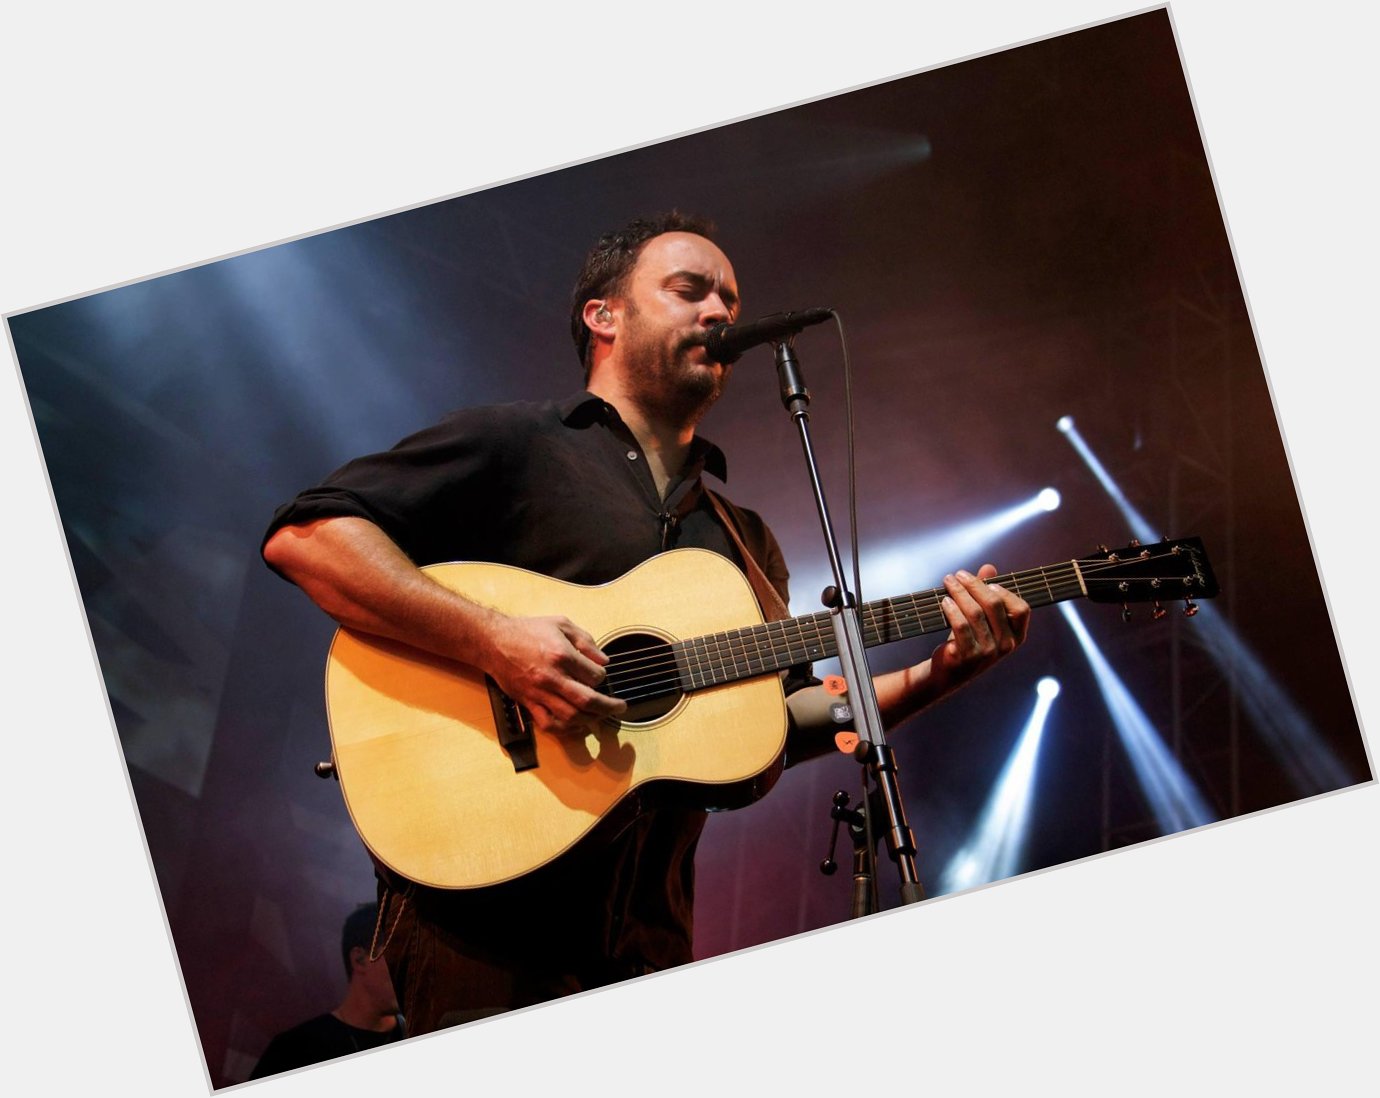 Happy 48th Birthday to Dave Matthews! 

He is the singer and guitar player for the 